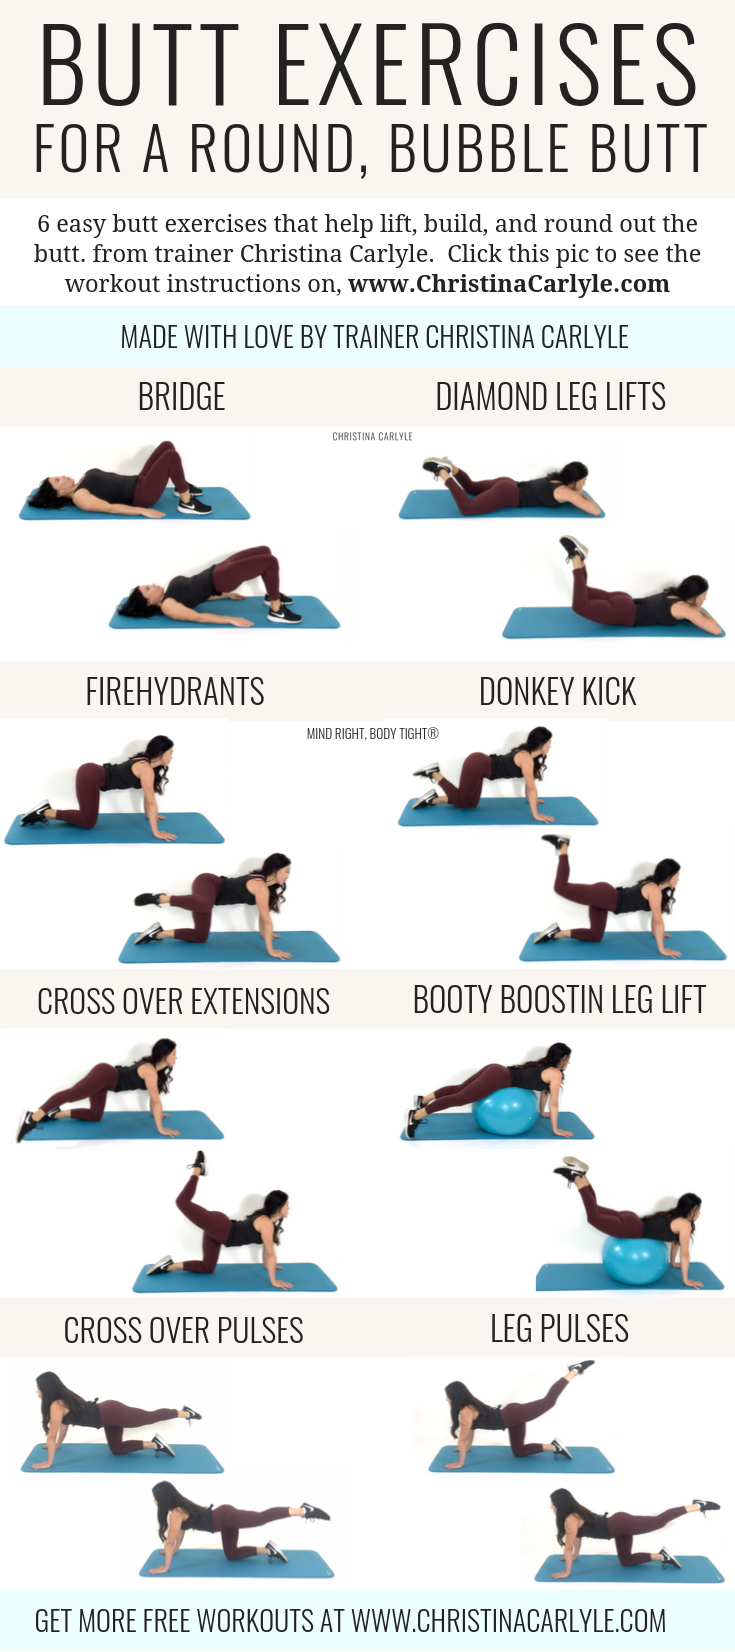 https://www.christinacarlyle.com/butt-exercises/